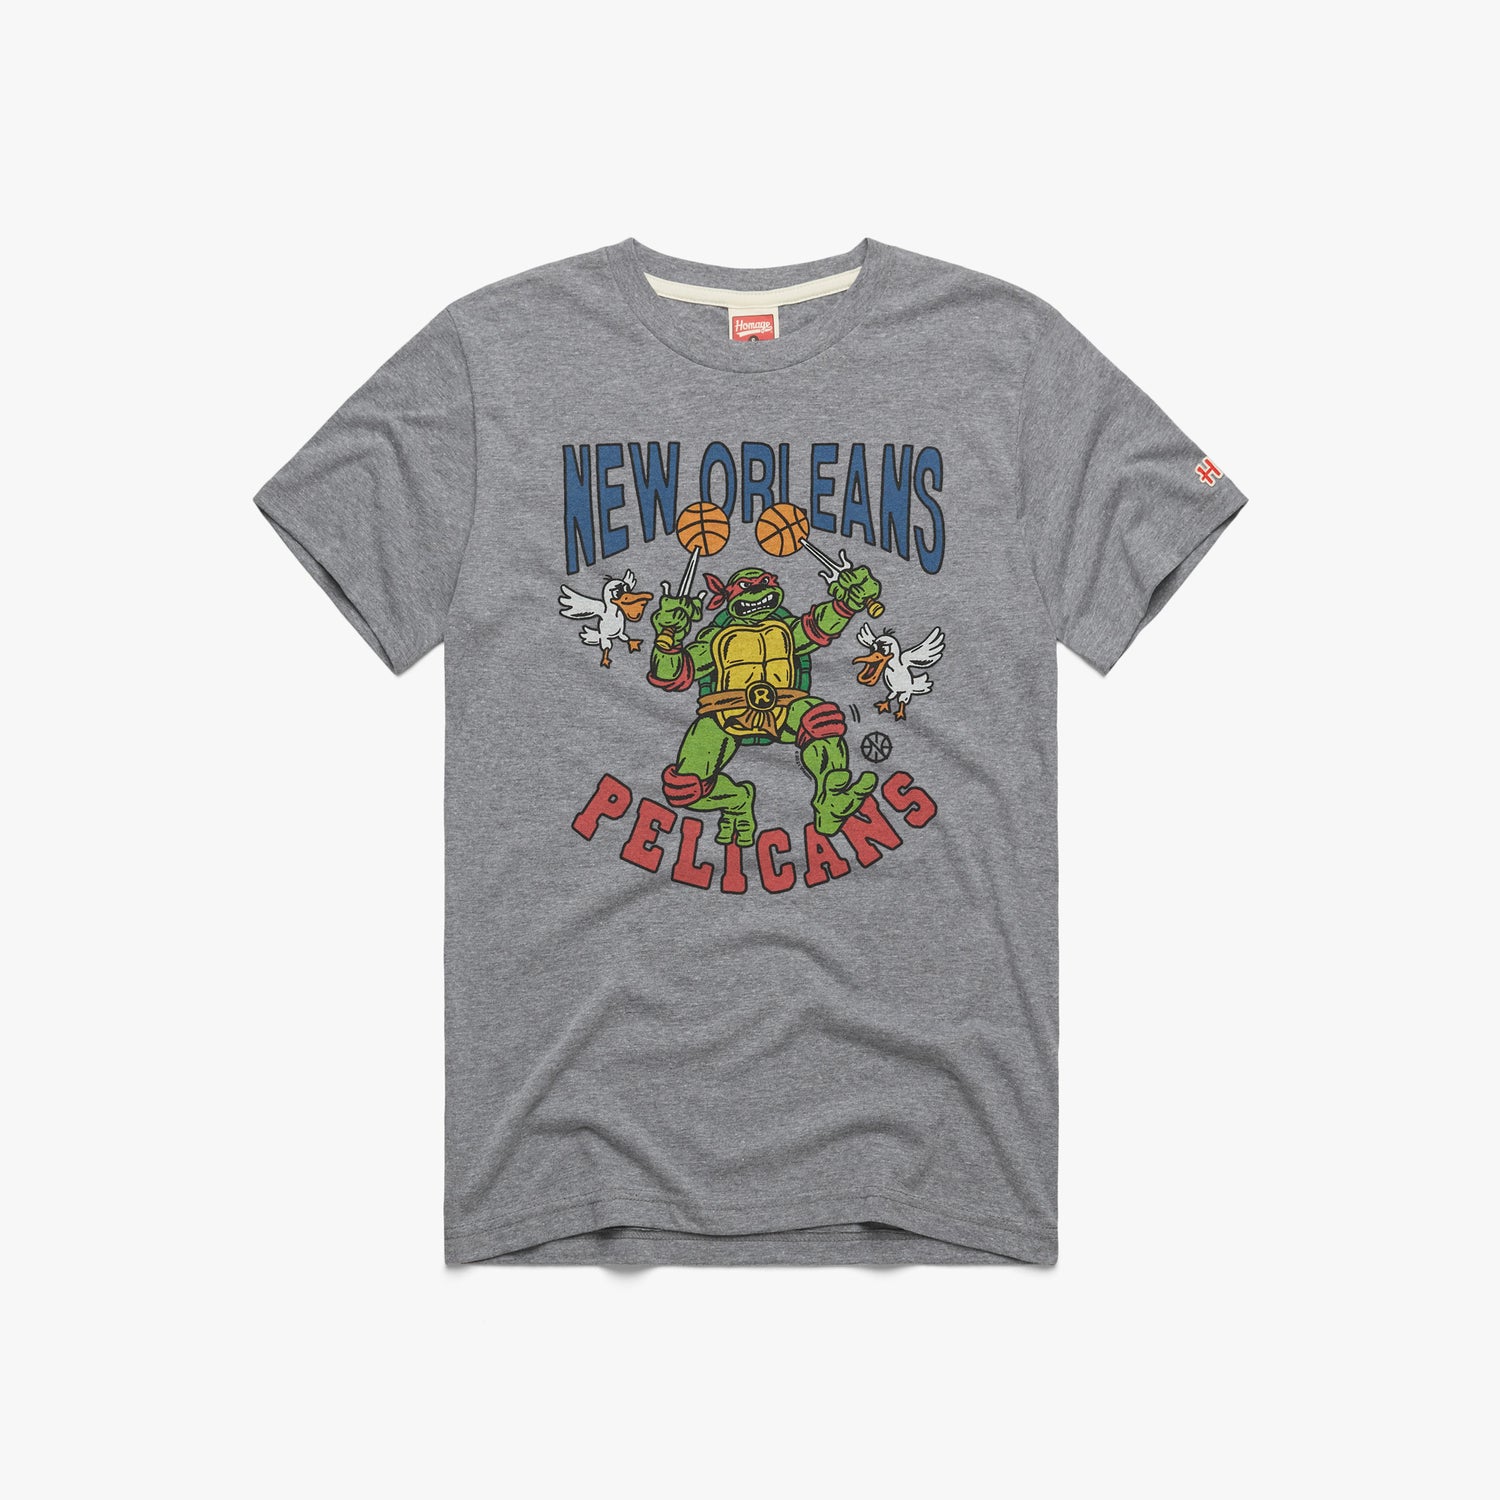 TMNT Raphael x New Orleans Pelicans T-Shirt from Homage | Grey | Retro Nickelodeon T-Shirt from Homage.